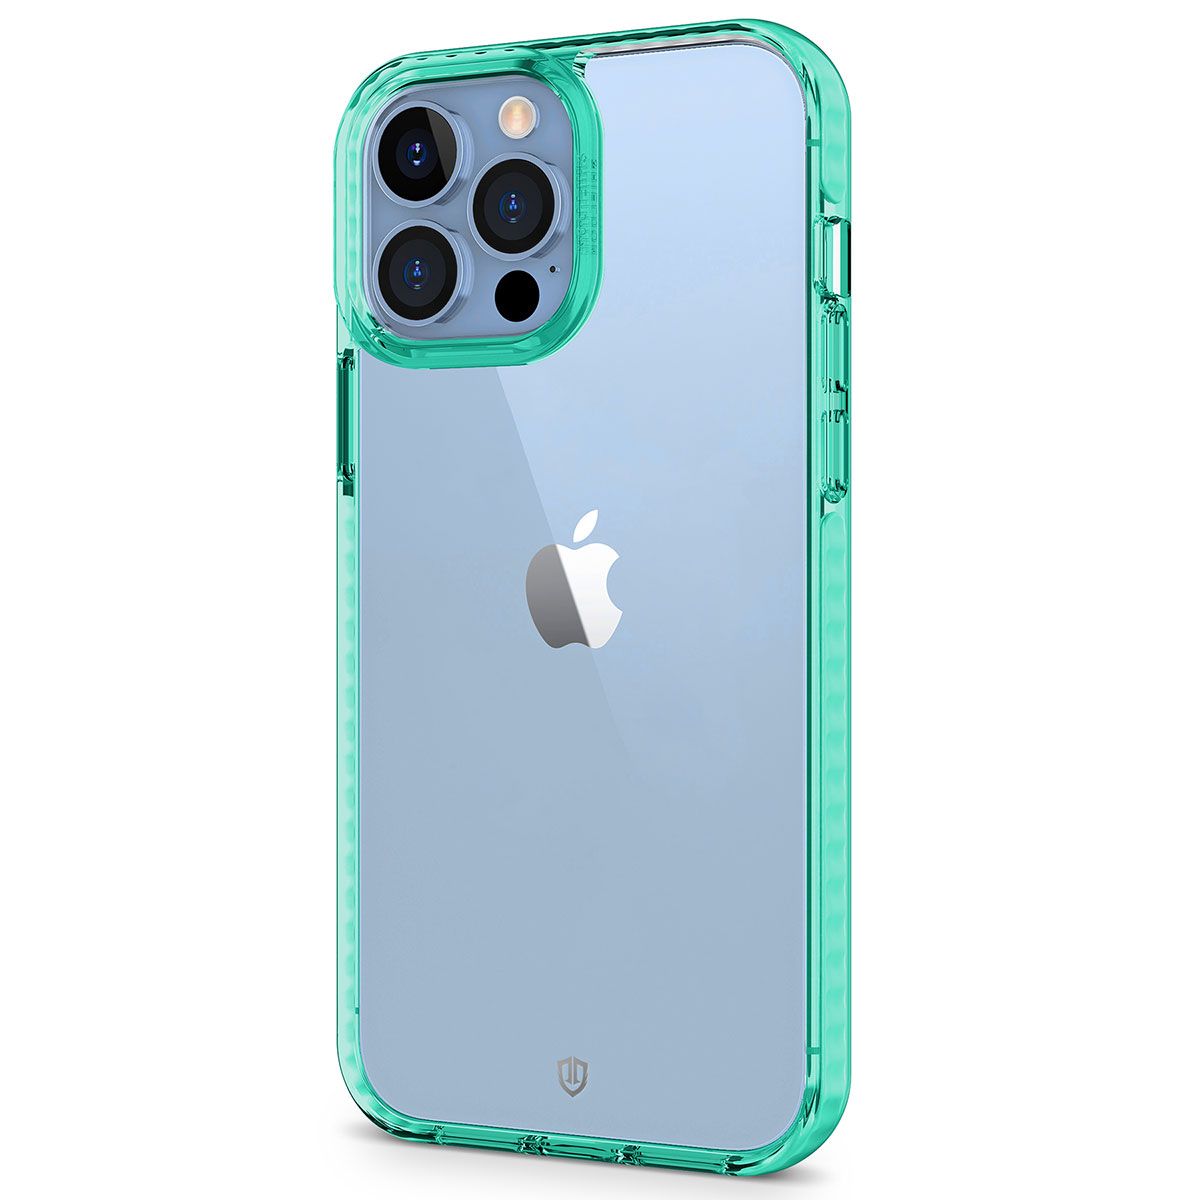 Thin, blue case for iPhone 13 Pro